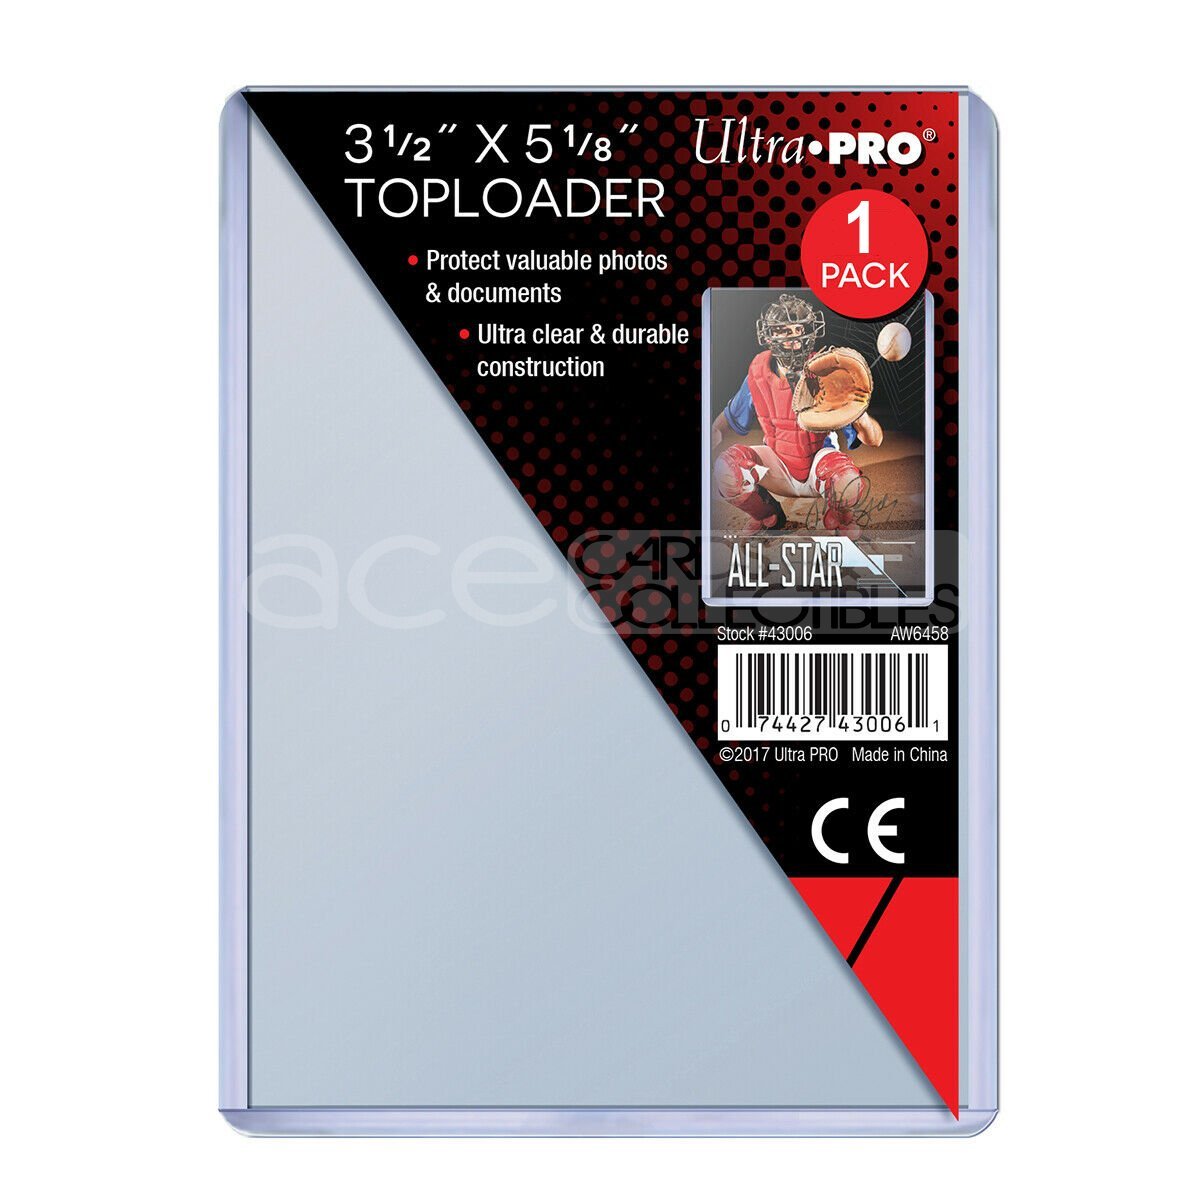 Ultra PRO Toploader 3 1/2' X 5 1/8' (Transformer Card Game Large Card)-Loose Piece (Clear)-Ultra PRO-Ace Cards & Collectibles